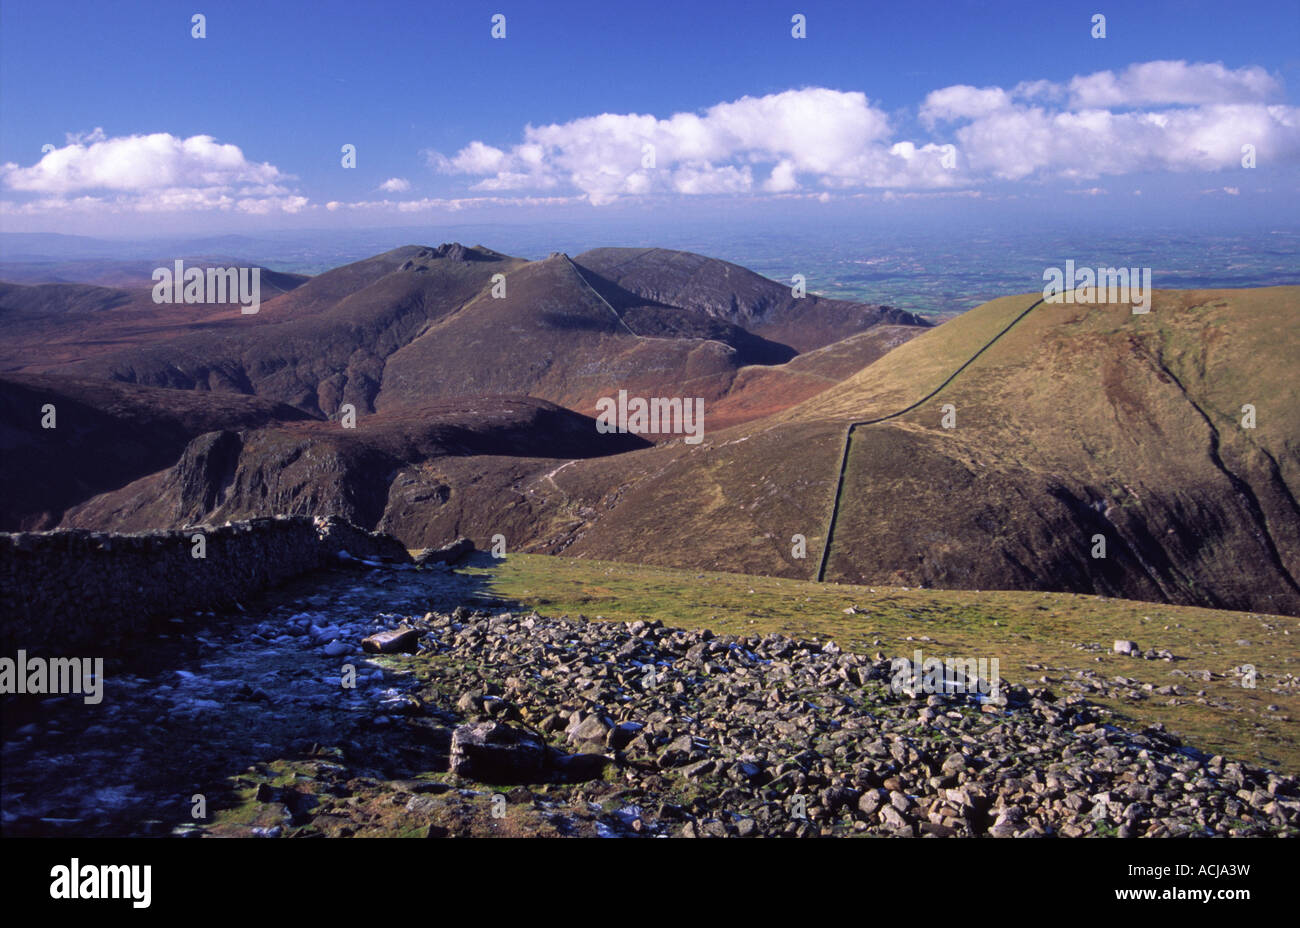 View across the Mourne Mountains from the summit of Slieve Donard, County Down, Northern Ireland. Stock Photo